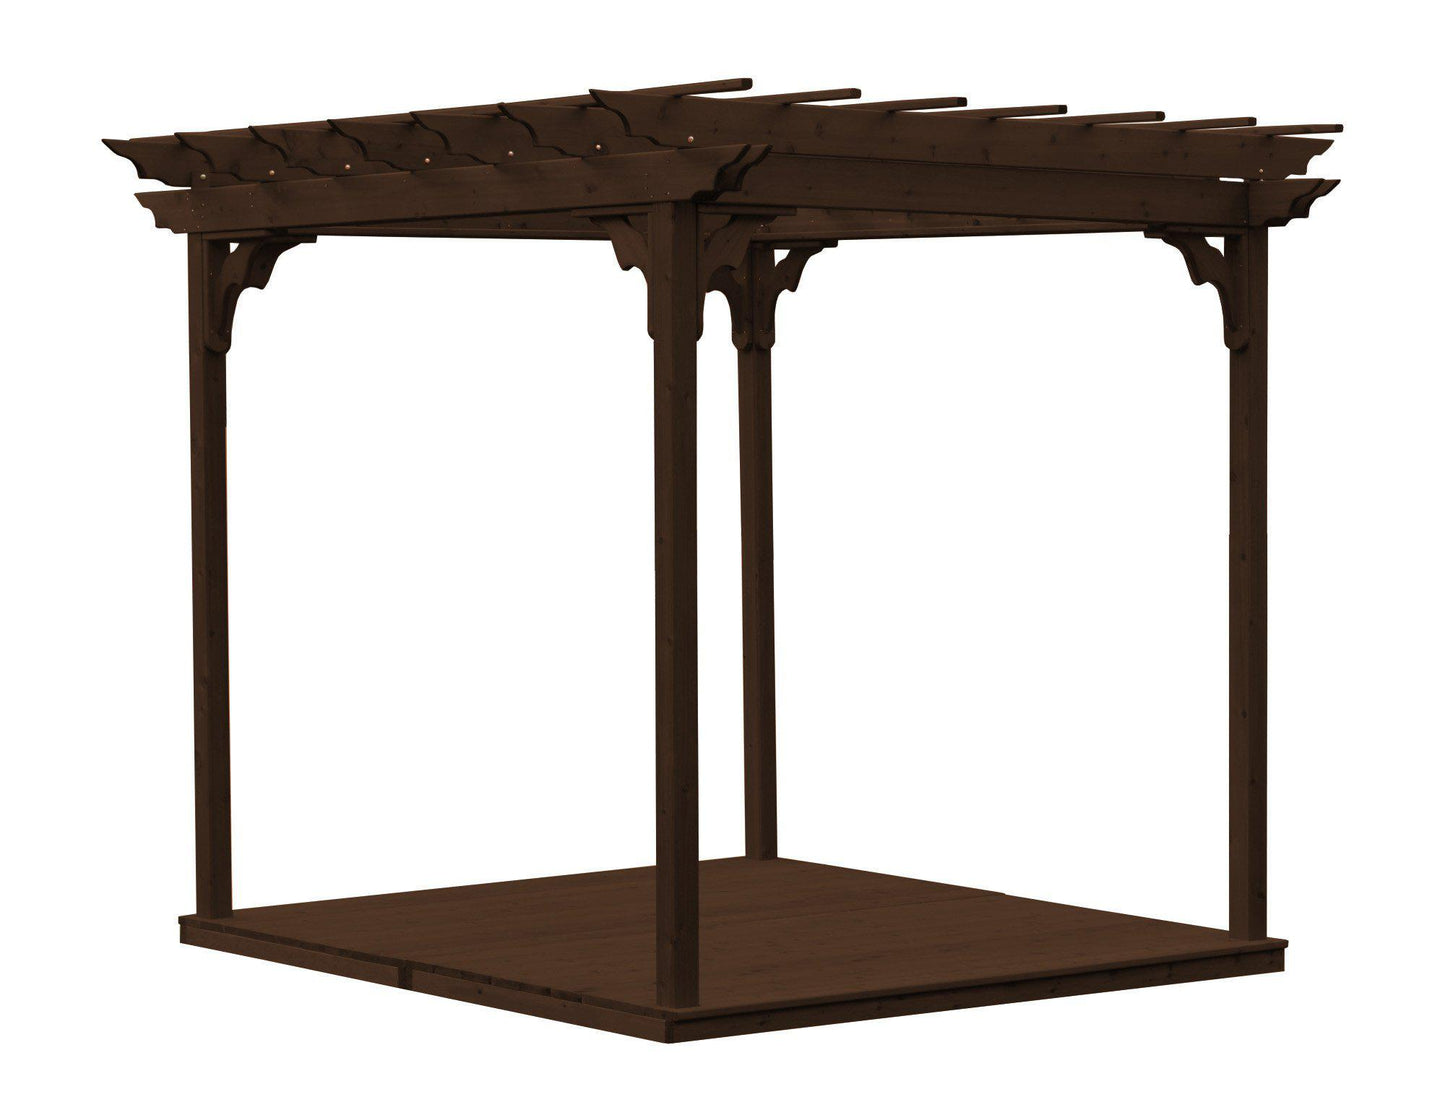 A&L FURNITURE CO. Western Red Cedar 8'x10' Pergola w/Deck & Swing Hangers - LEAD TIME TO SHIP 4 WEEKS OR LESS